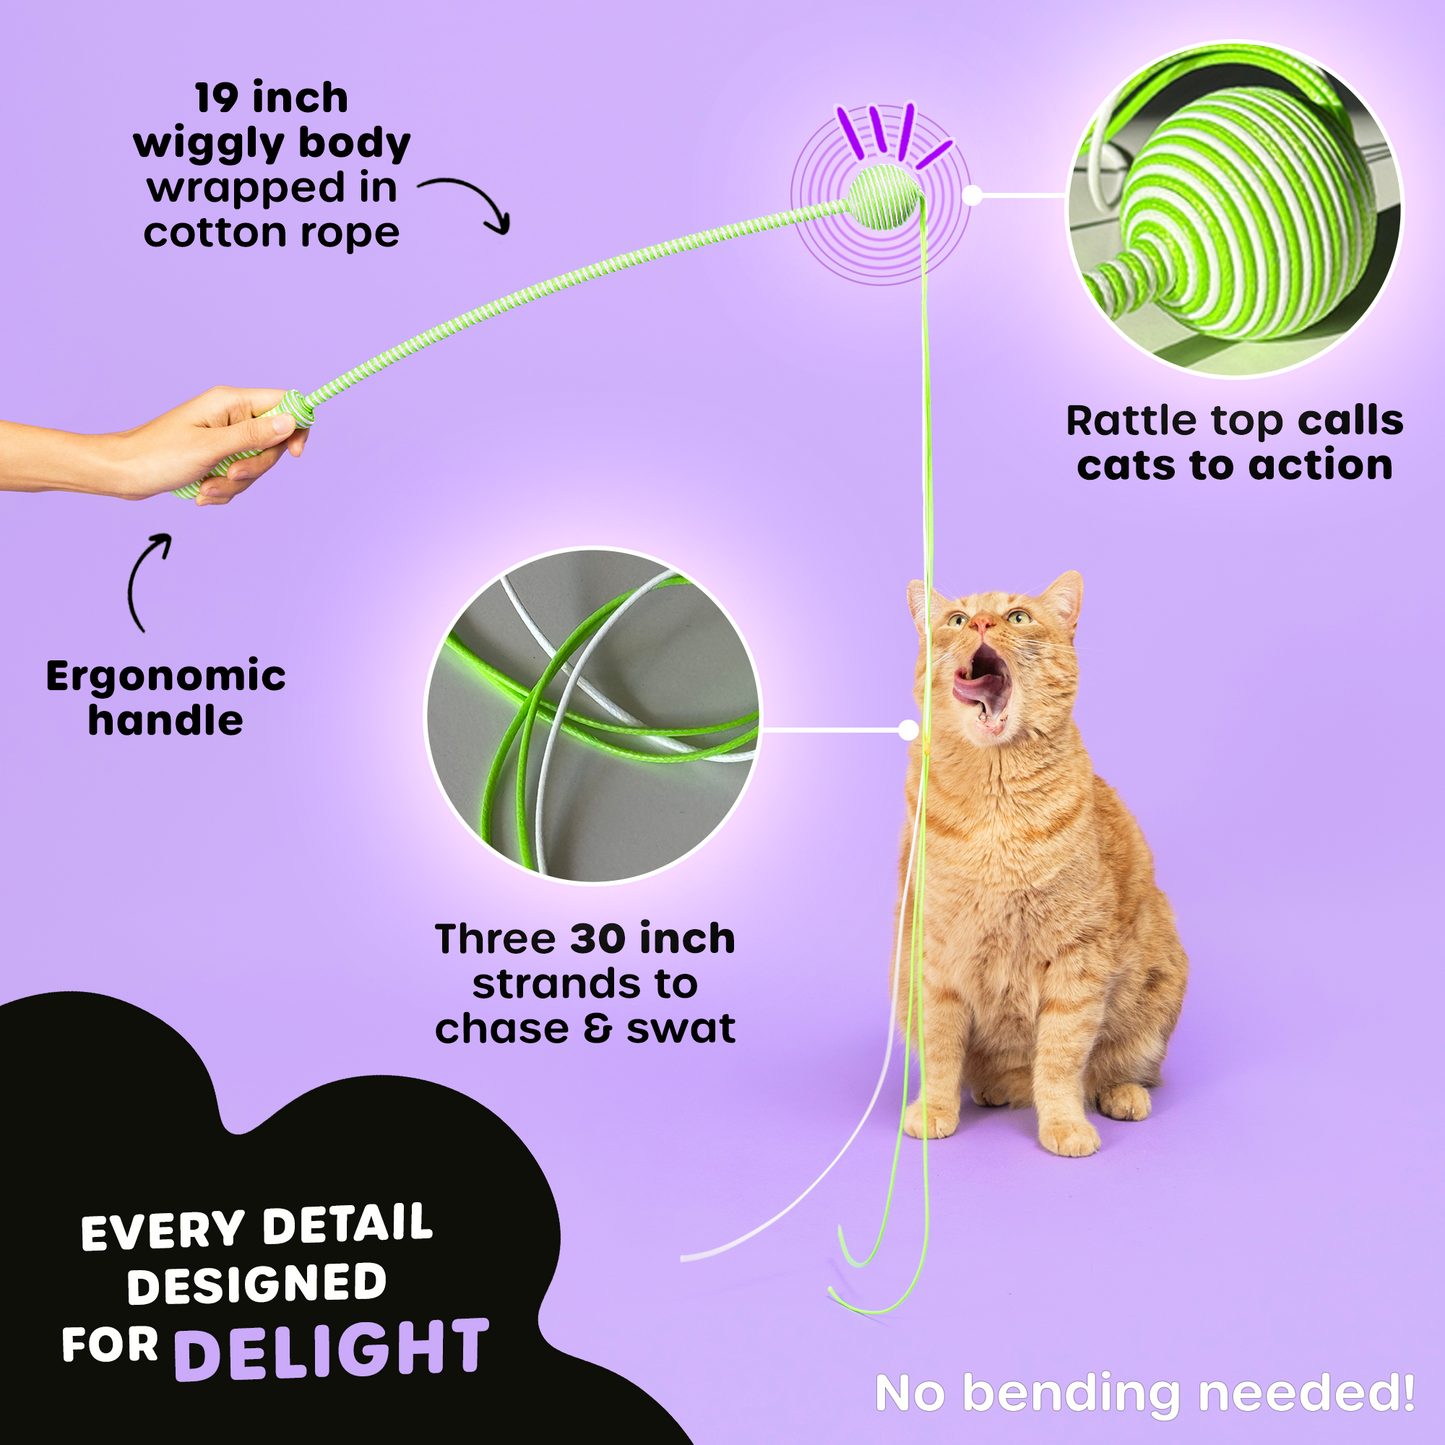 Graphic illustration featuring a hand holding the Wiggle Wand™ Cat Toy with an attentive cat gazing upwards, complemented by feature highlights like durable cotton rope and interactive design, showcasing the toy's appeal and functionality.